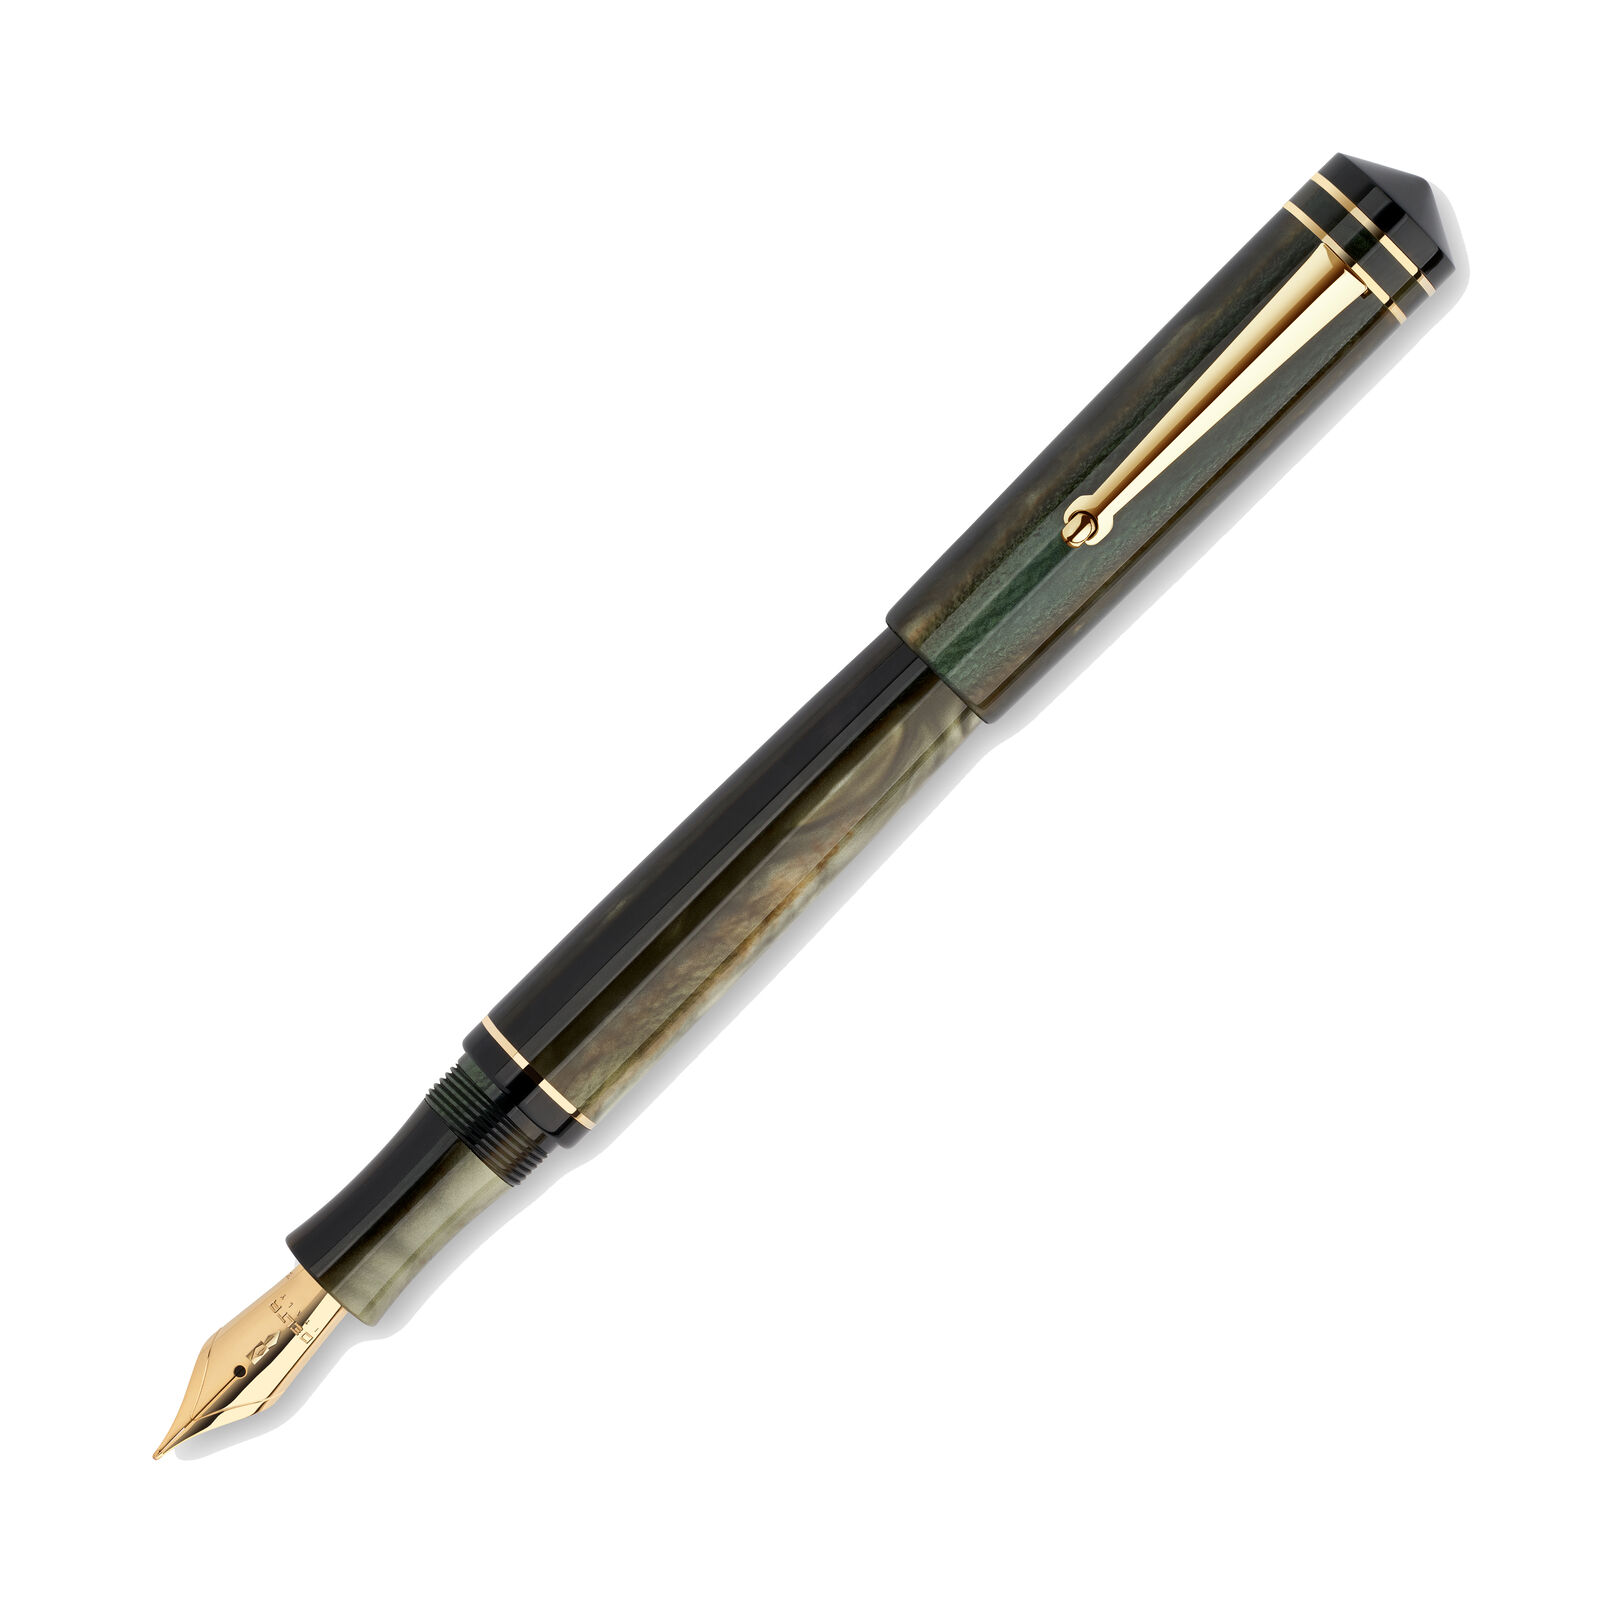 Delta Write Balance Fountain Pen in Green - Broad Point - NEW in Box